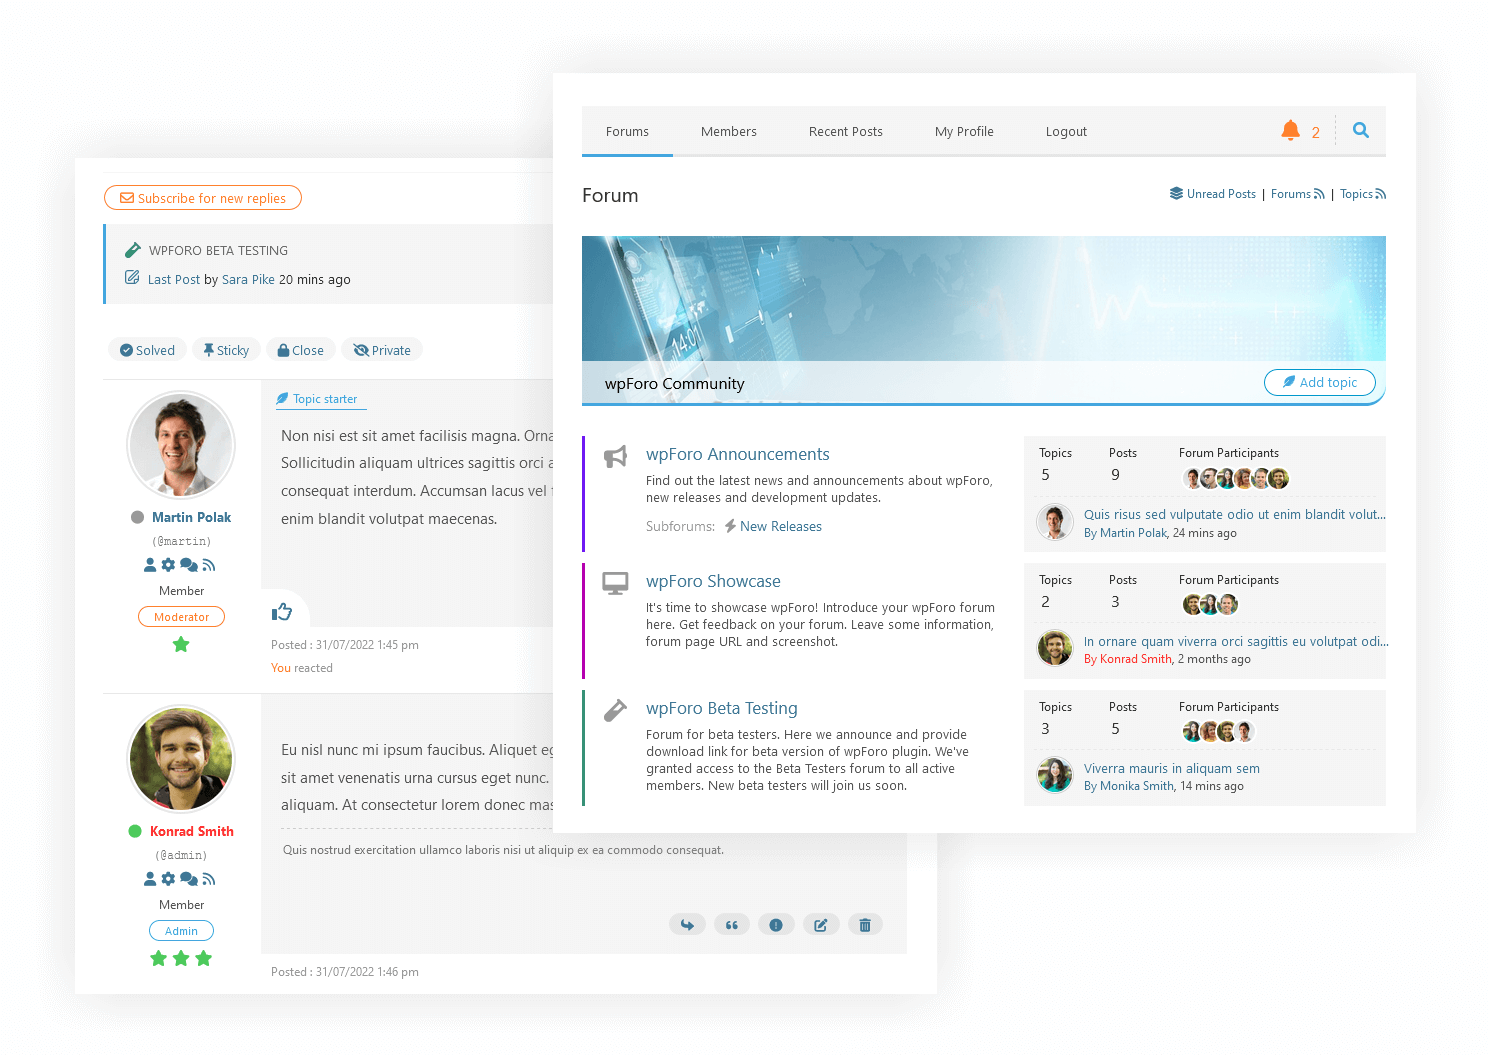 Simplified Forum Layout (Thread and Forums)